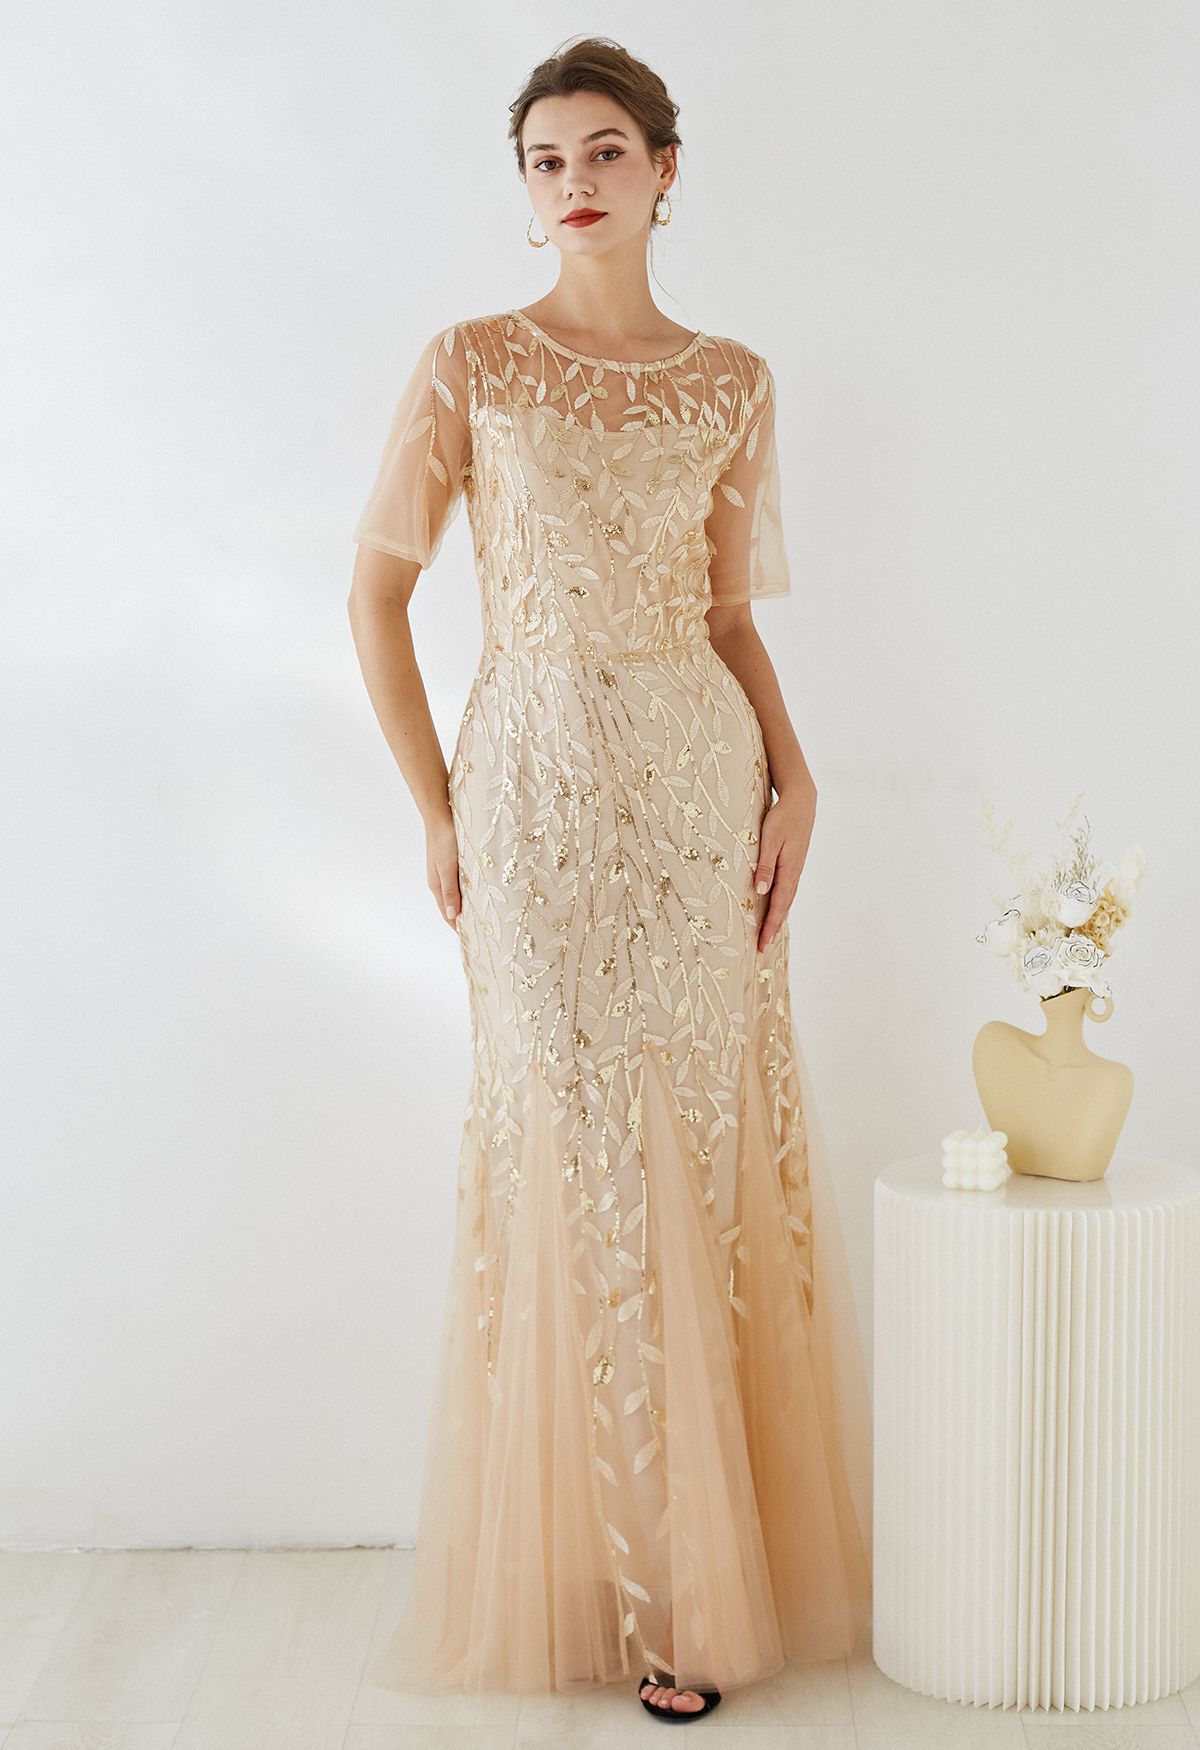 Leaves Branch Sequined Mesh Panelled Gown in Apricot